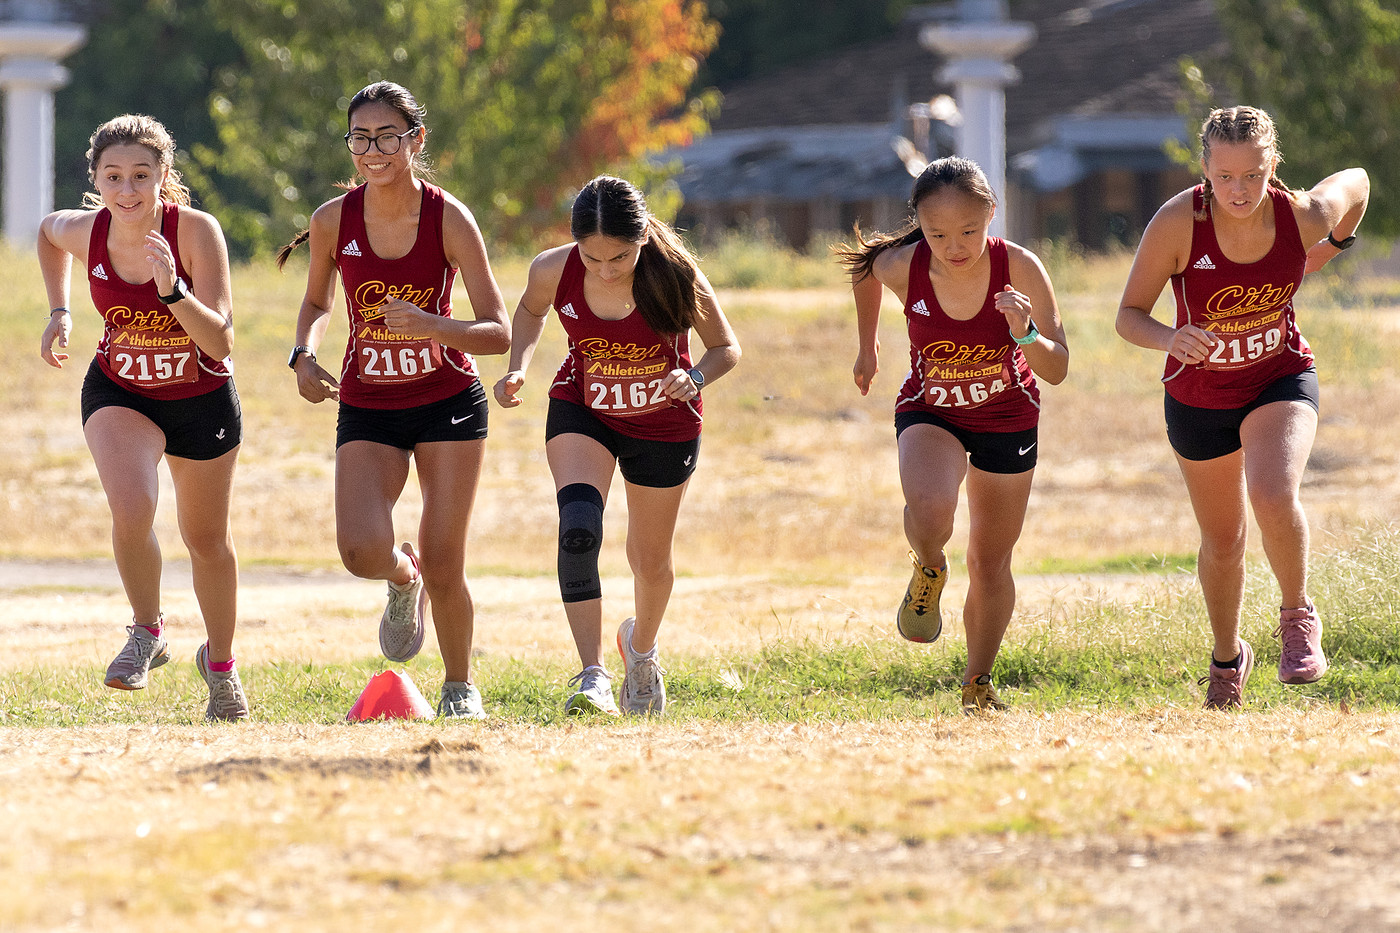 Wong and Mejia finish 3 seconds apart in 24th and 25th place overall at the NorCal Championships; the Panthers finished 10th overall